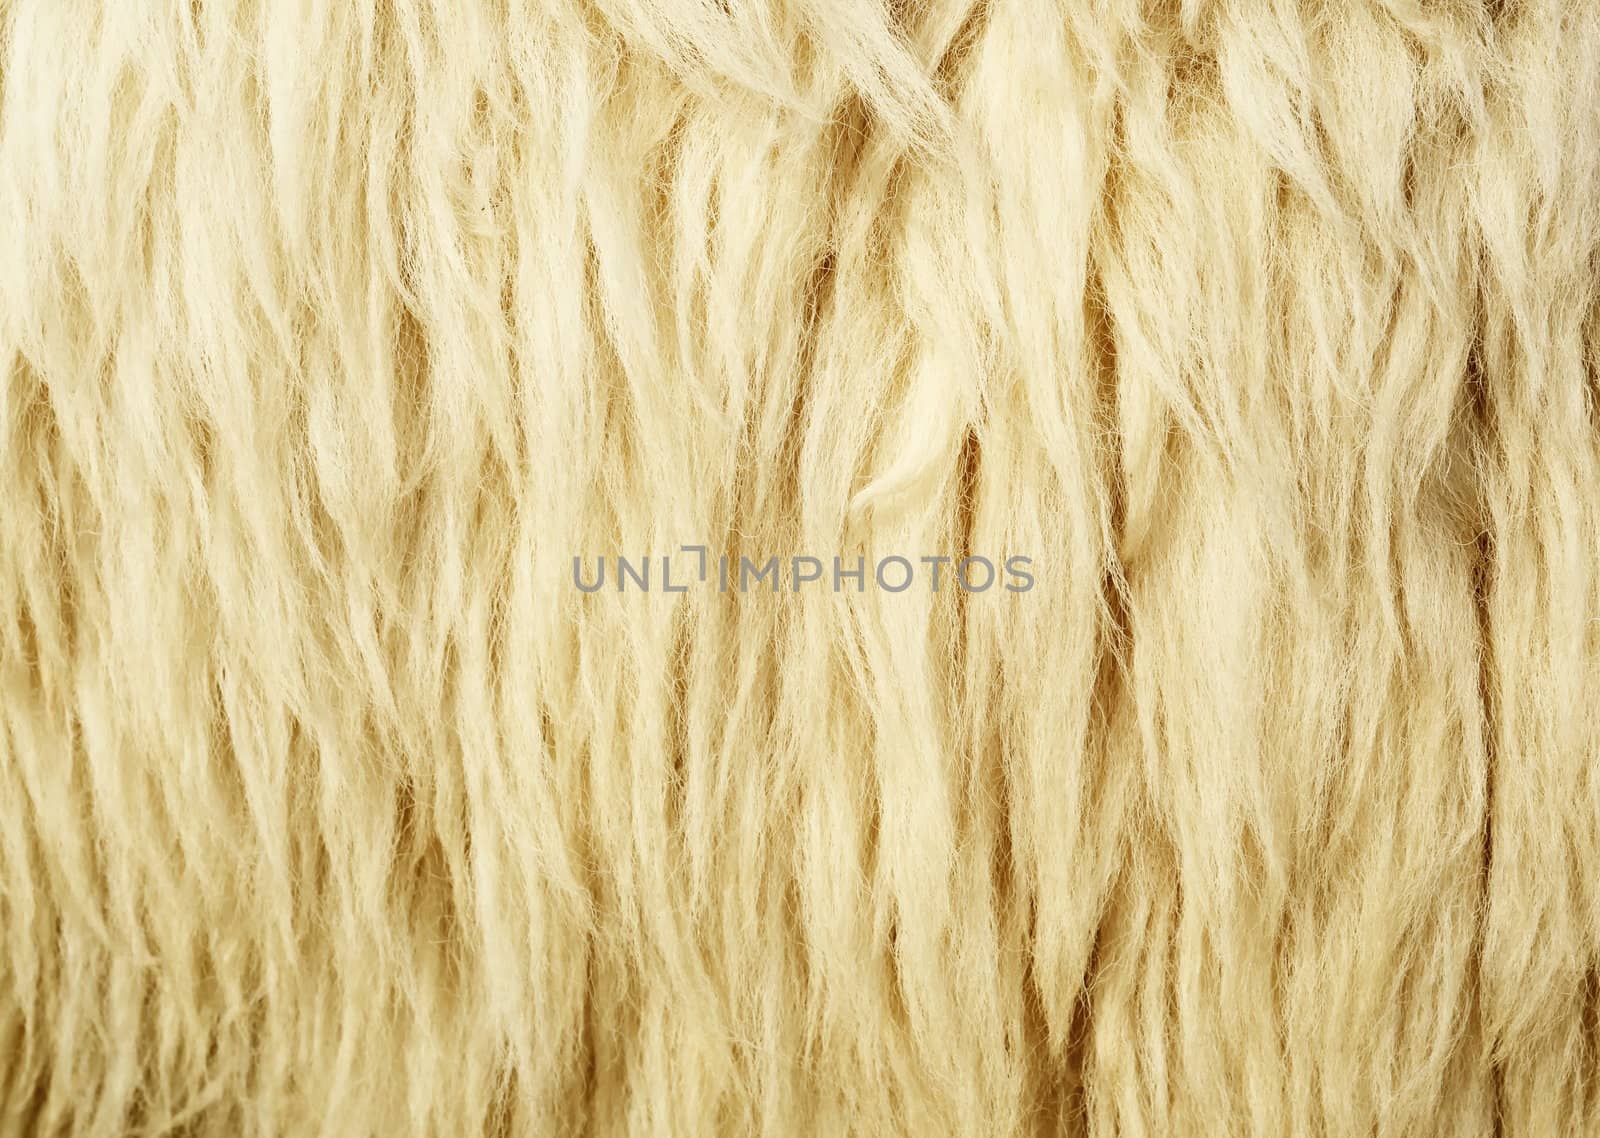 Texture of Wool or Sheepskin for Background